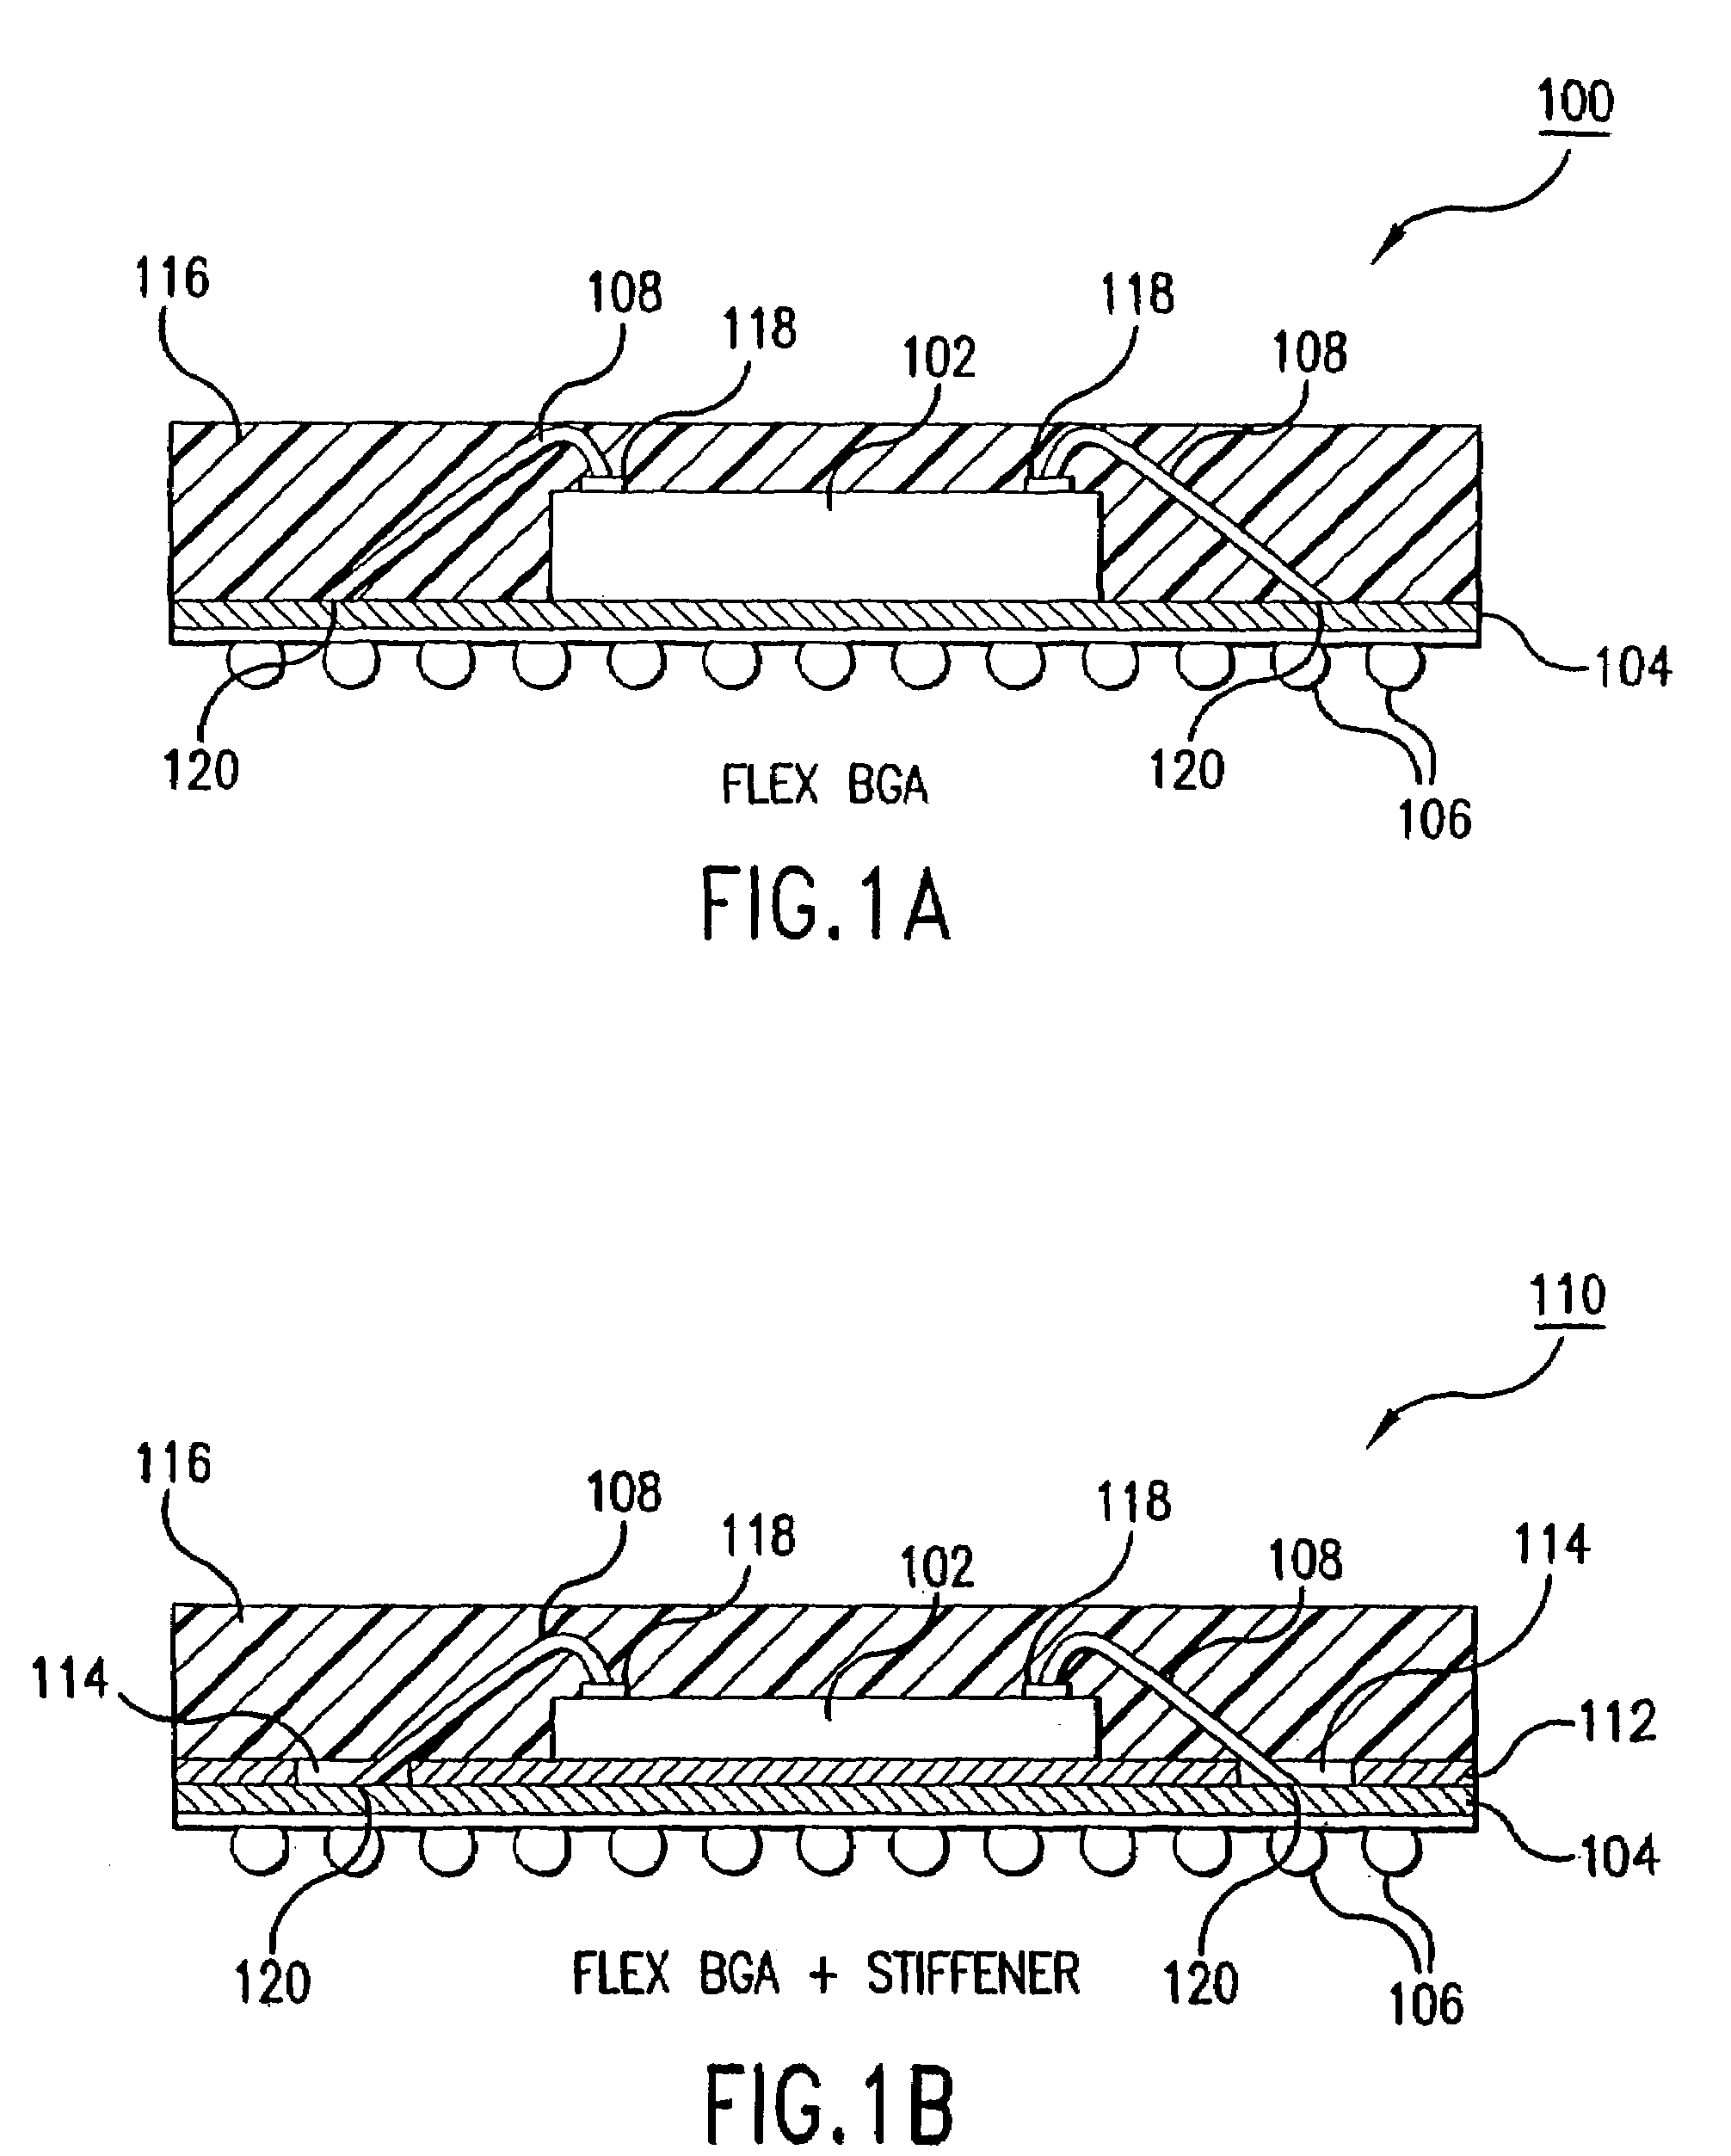 IC die support structures for ball grid array package fabrication